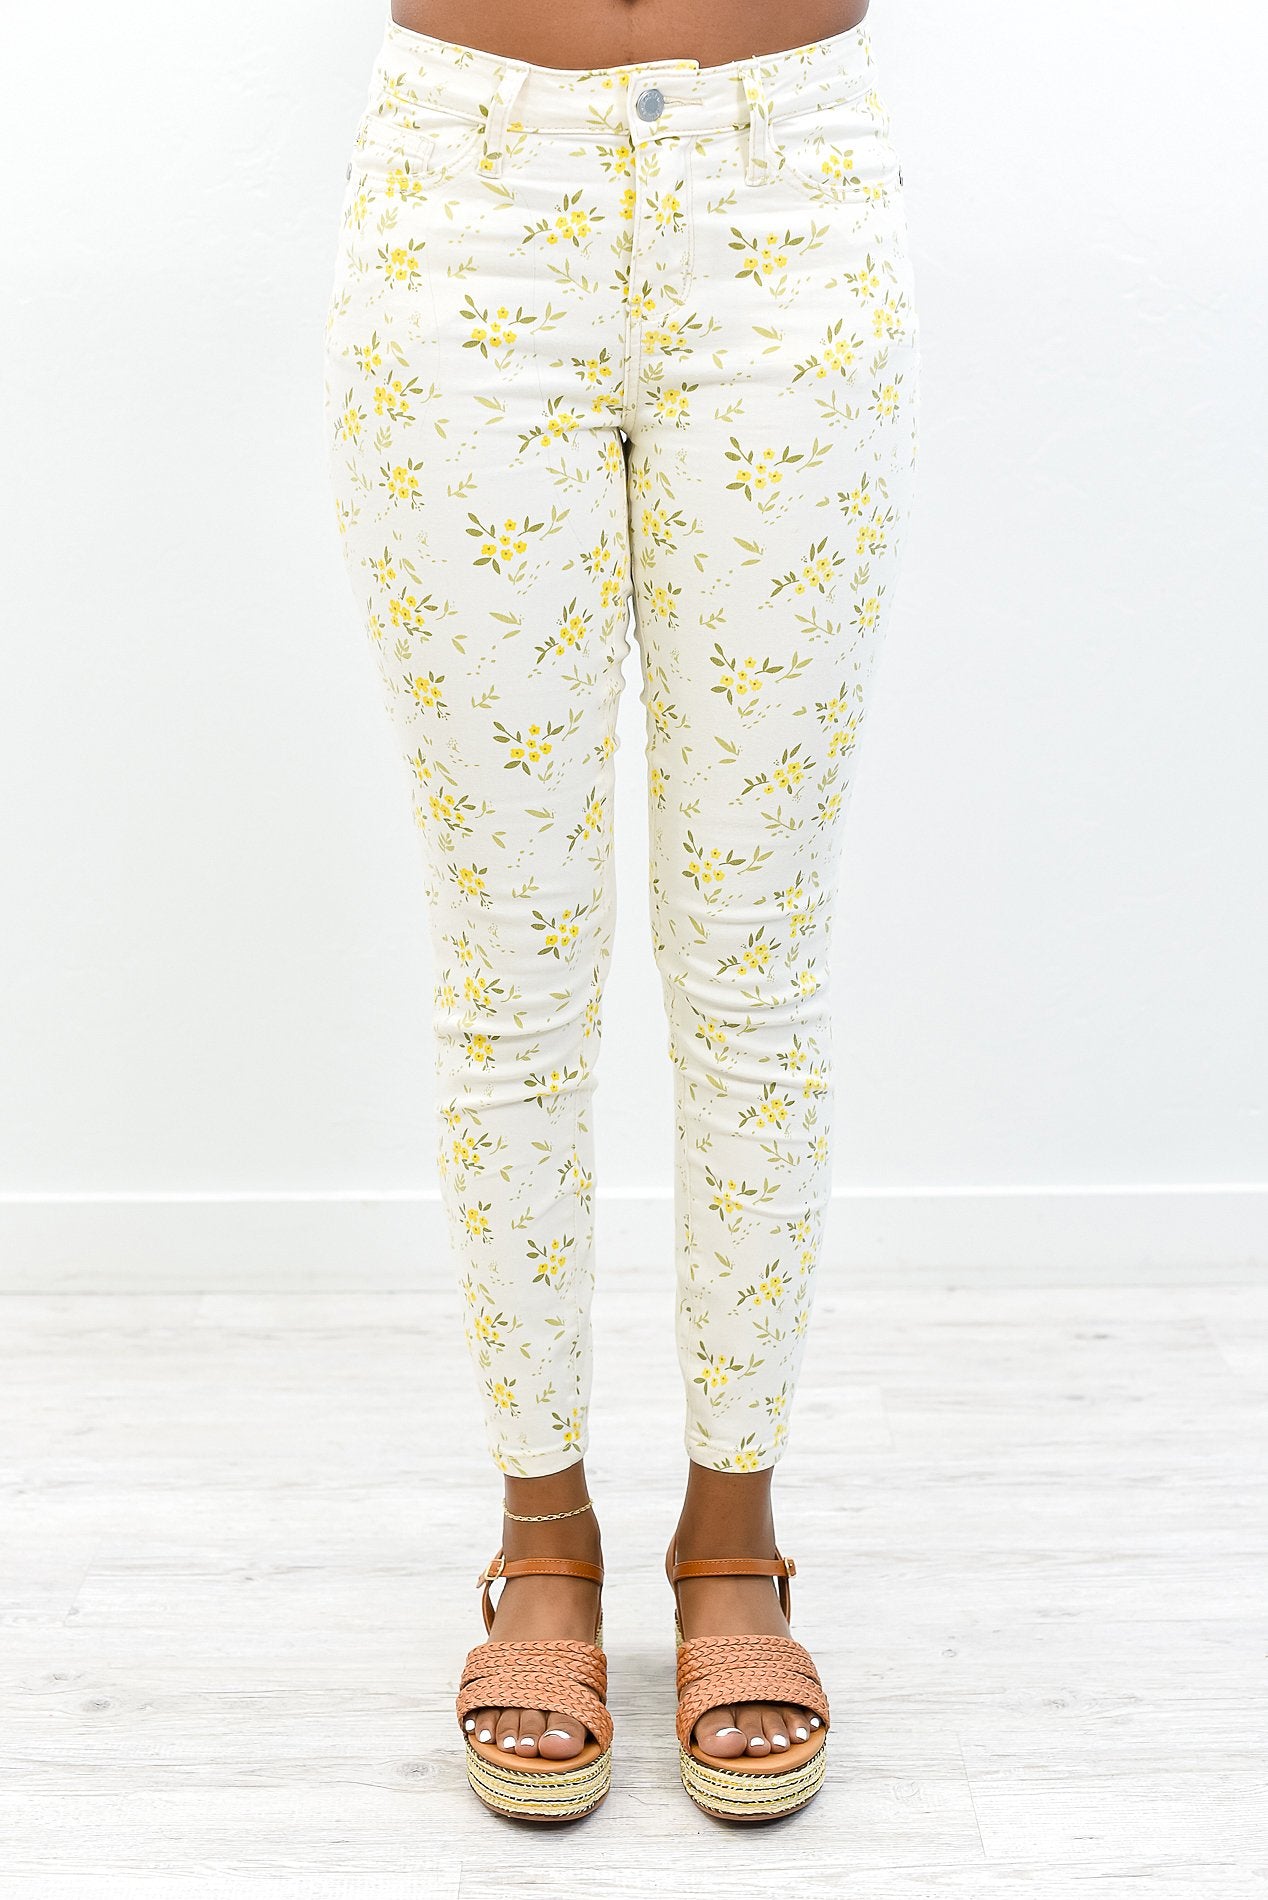 Denim And Flowers White/Yellow Floral Skinny Fit Jeans - K633WH